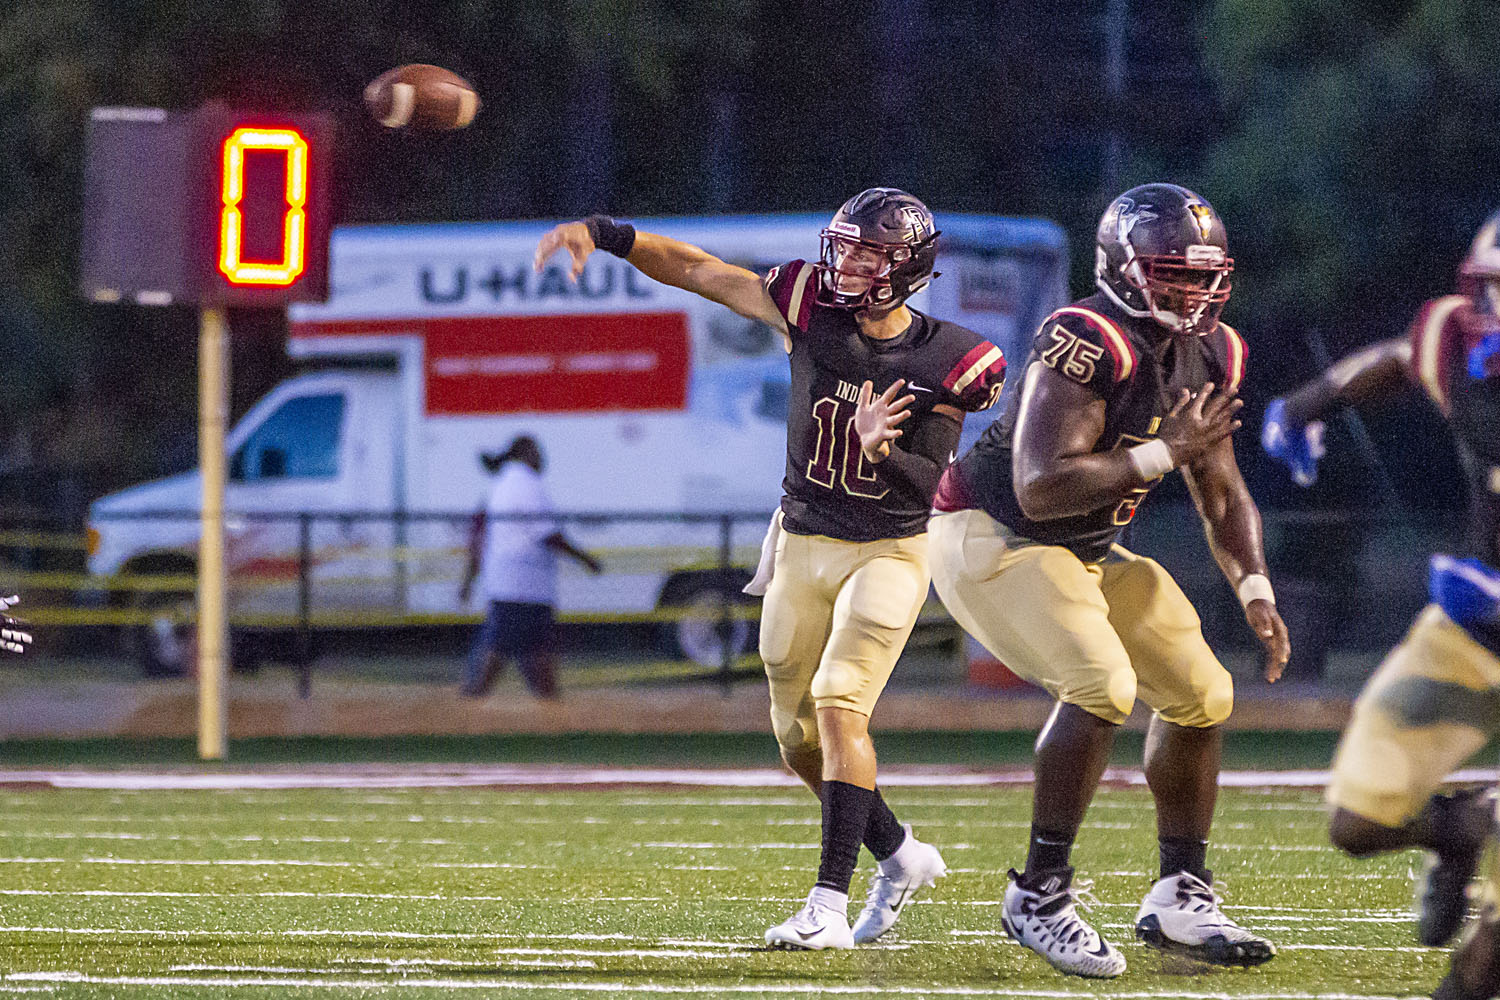 Pinson Valley defeats Gardendale 42-7 on homecoming night